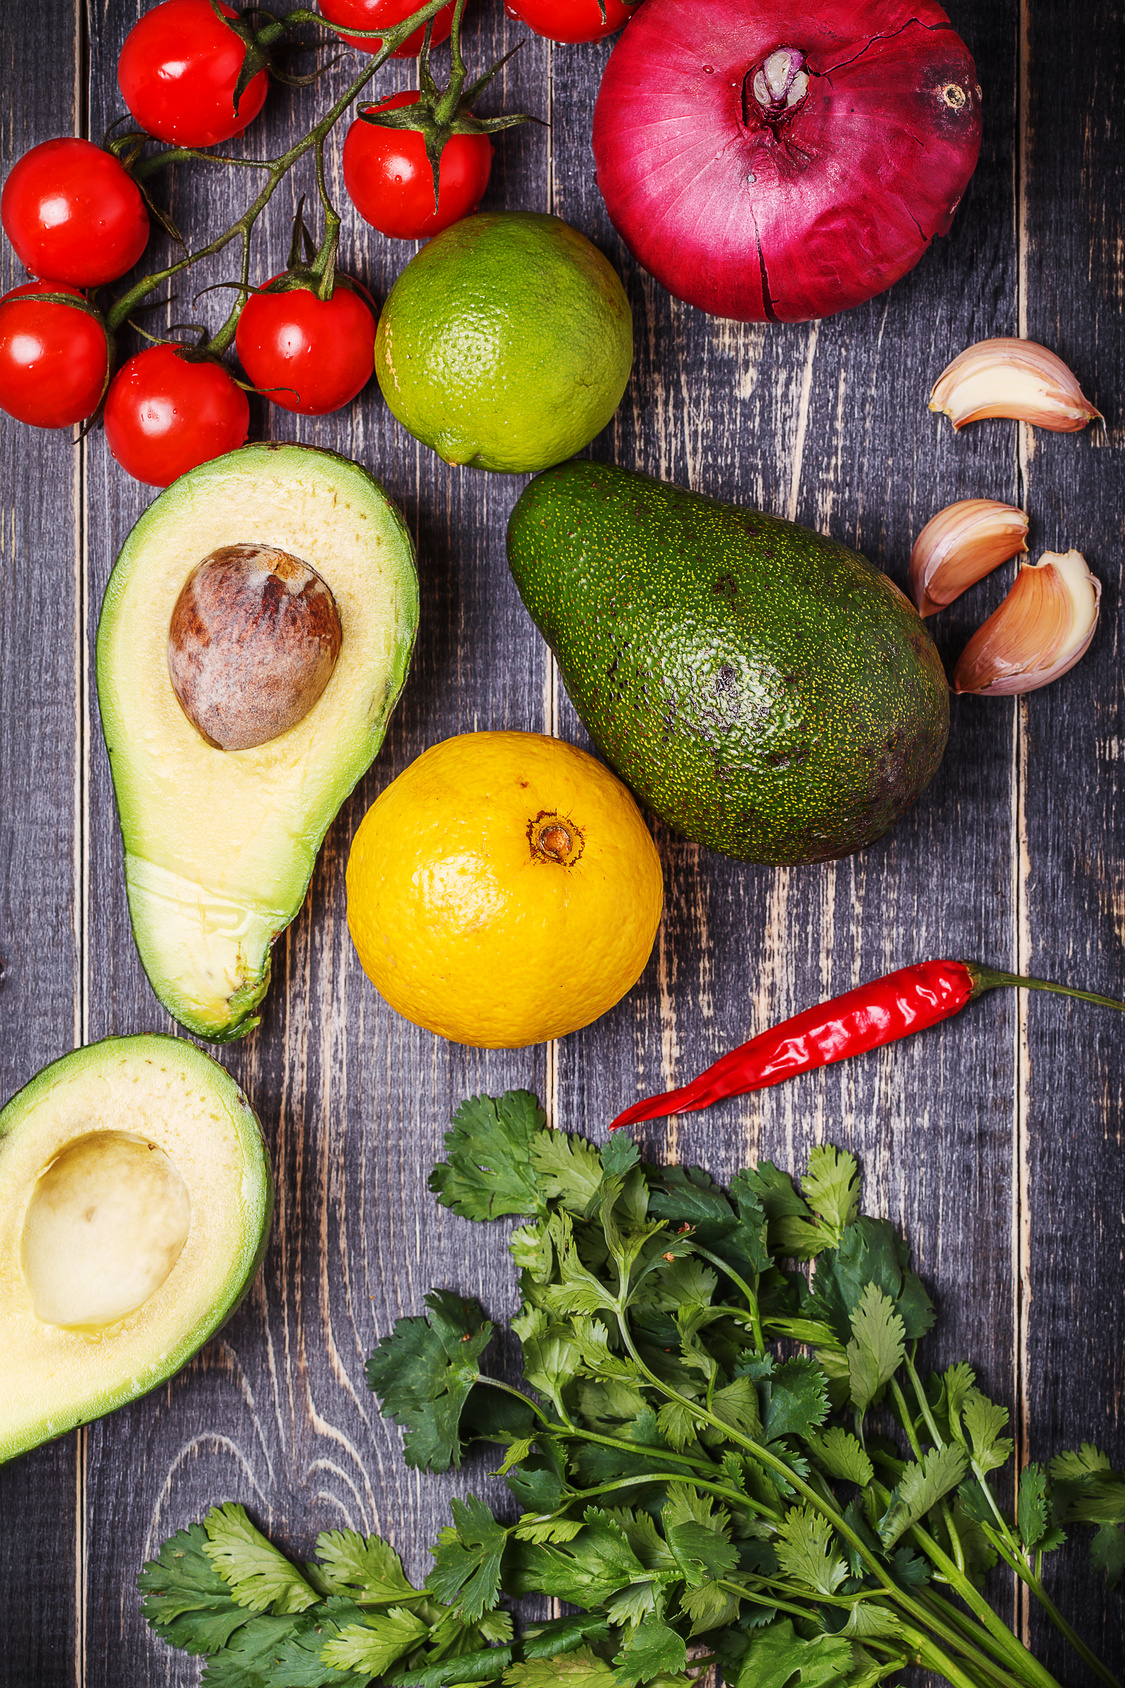 Spice Up Dinner With This Mango Guacamole Recipe